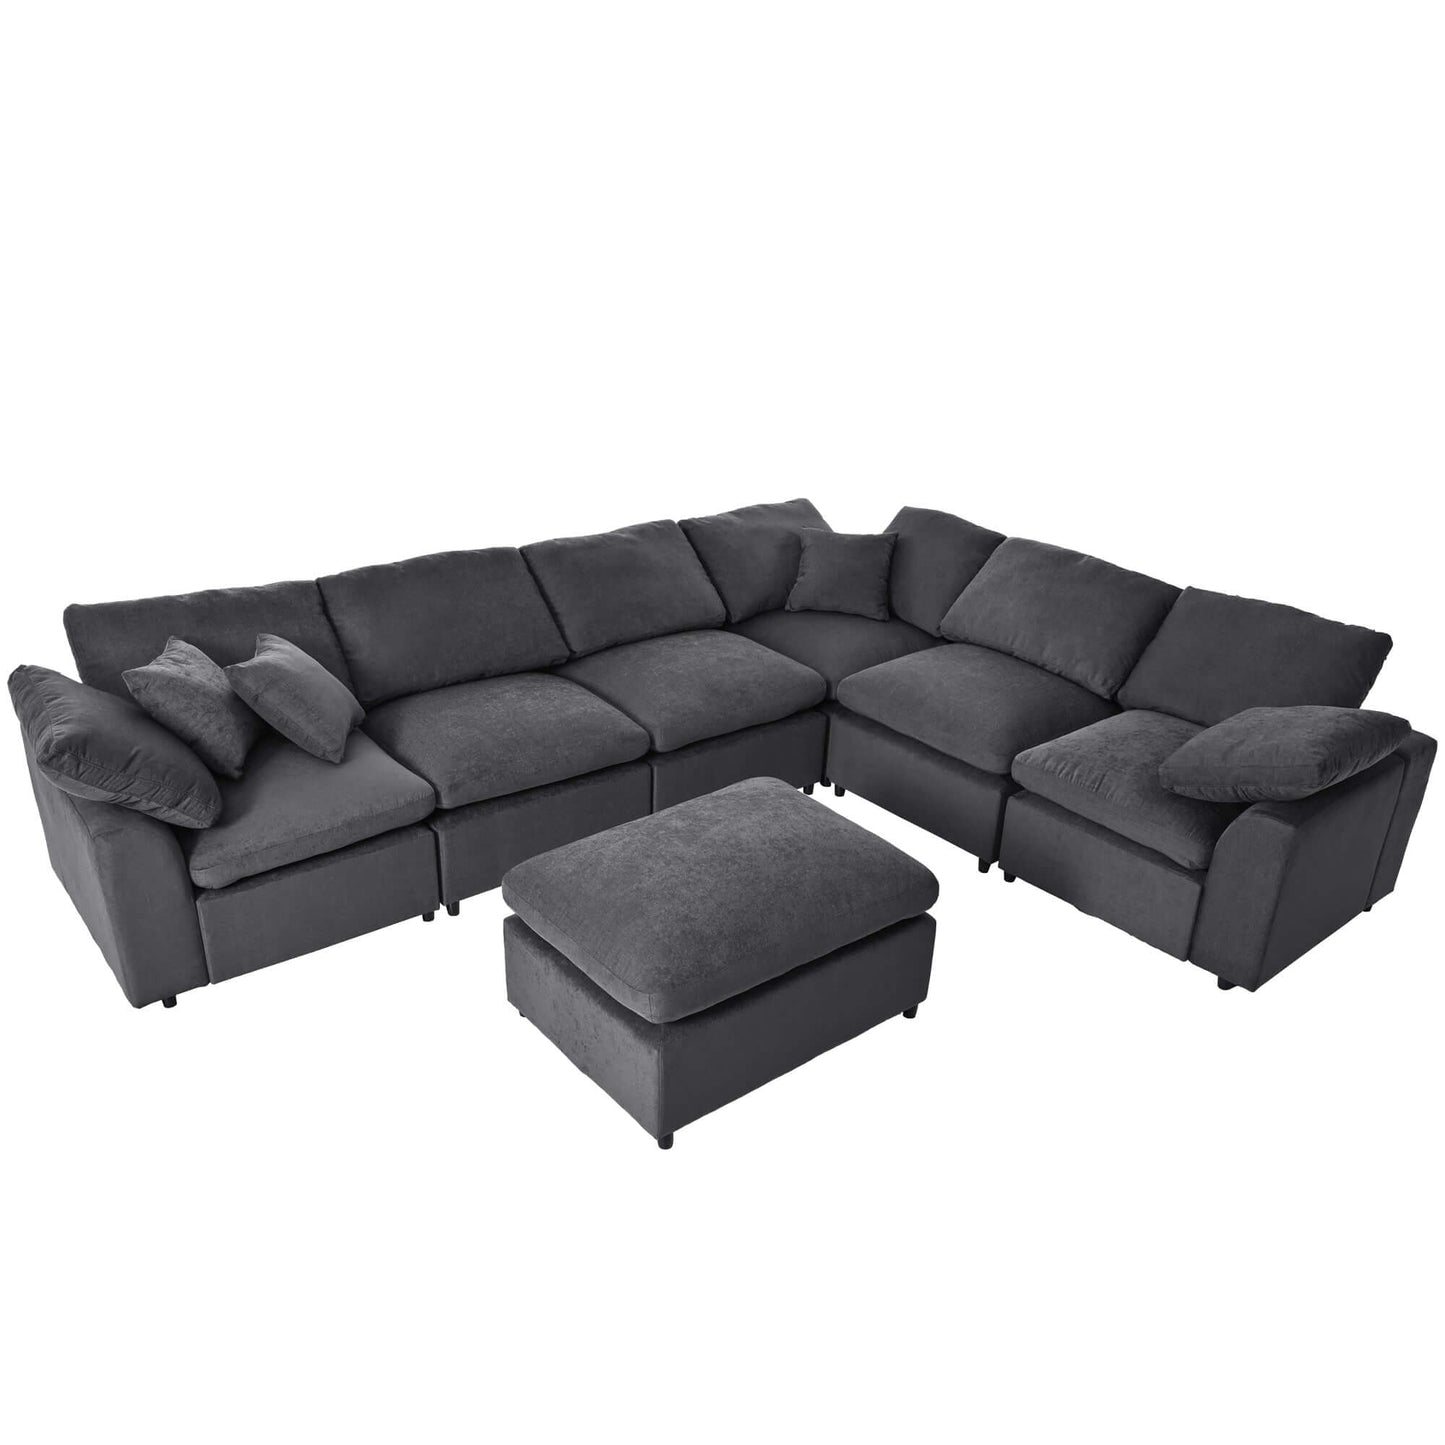 Modern Low Profile Modular U-Shaped Sectional Sofa with Ottoman in Gray or Beige 129" - Revel Sofa 